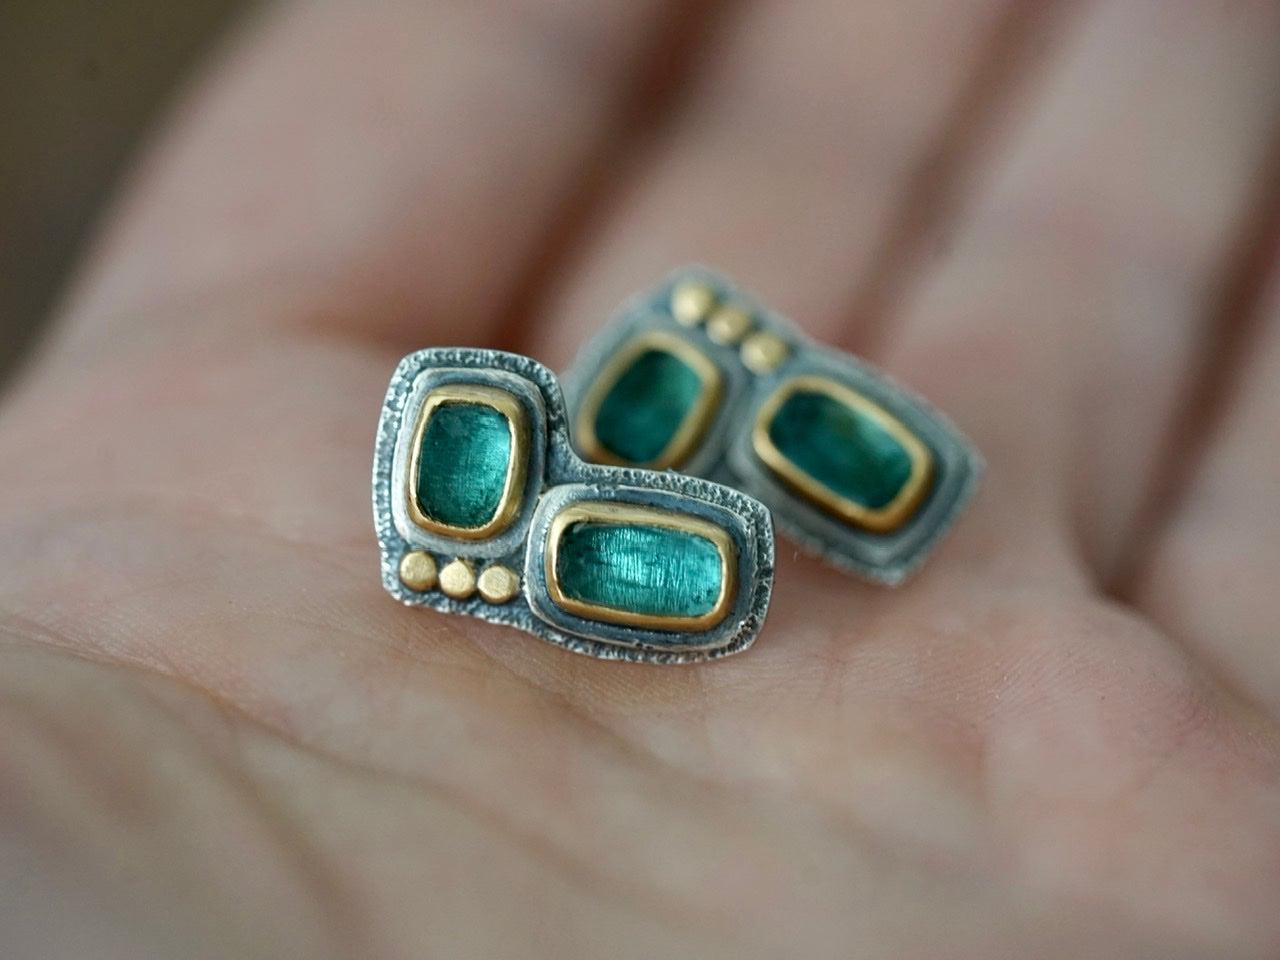 Teal blue tourmaline and 22k gold post earrings